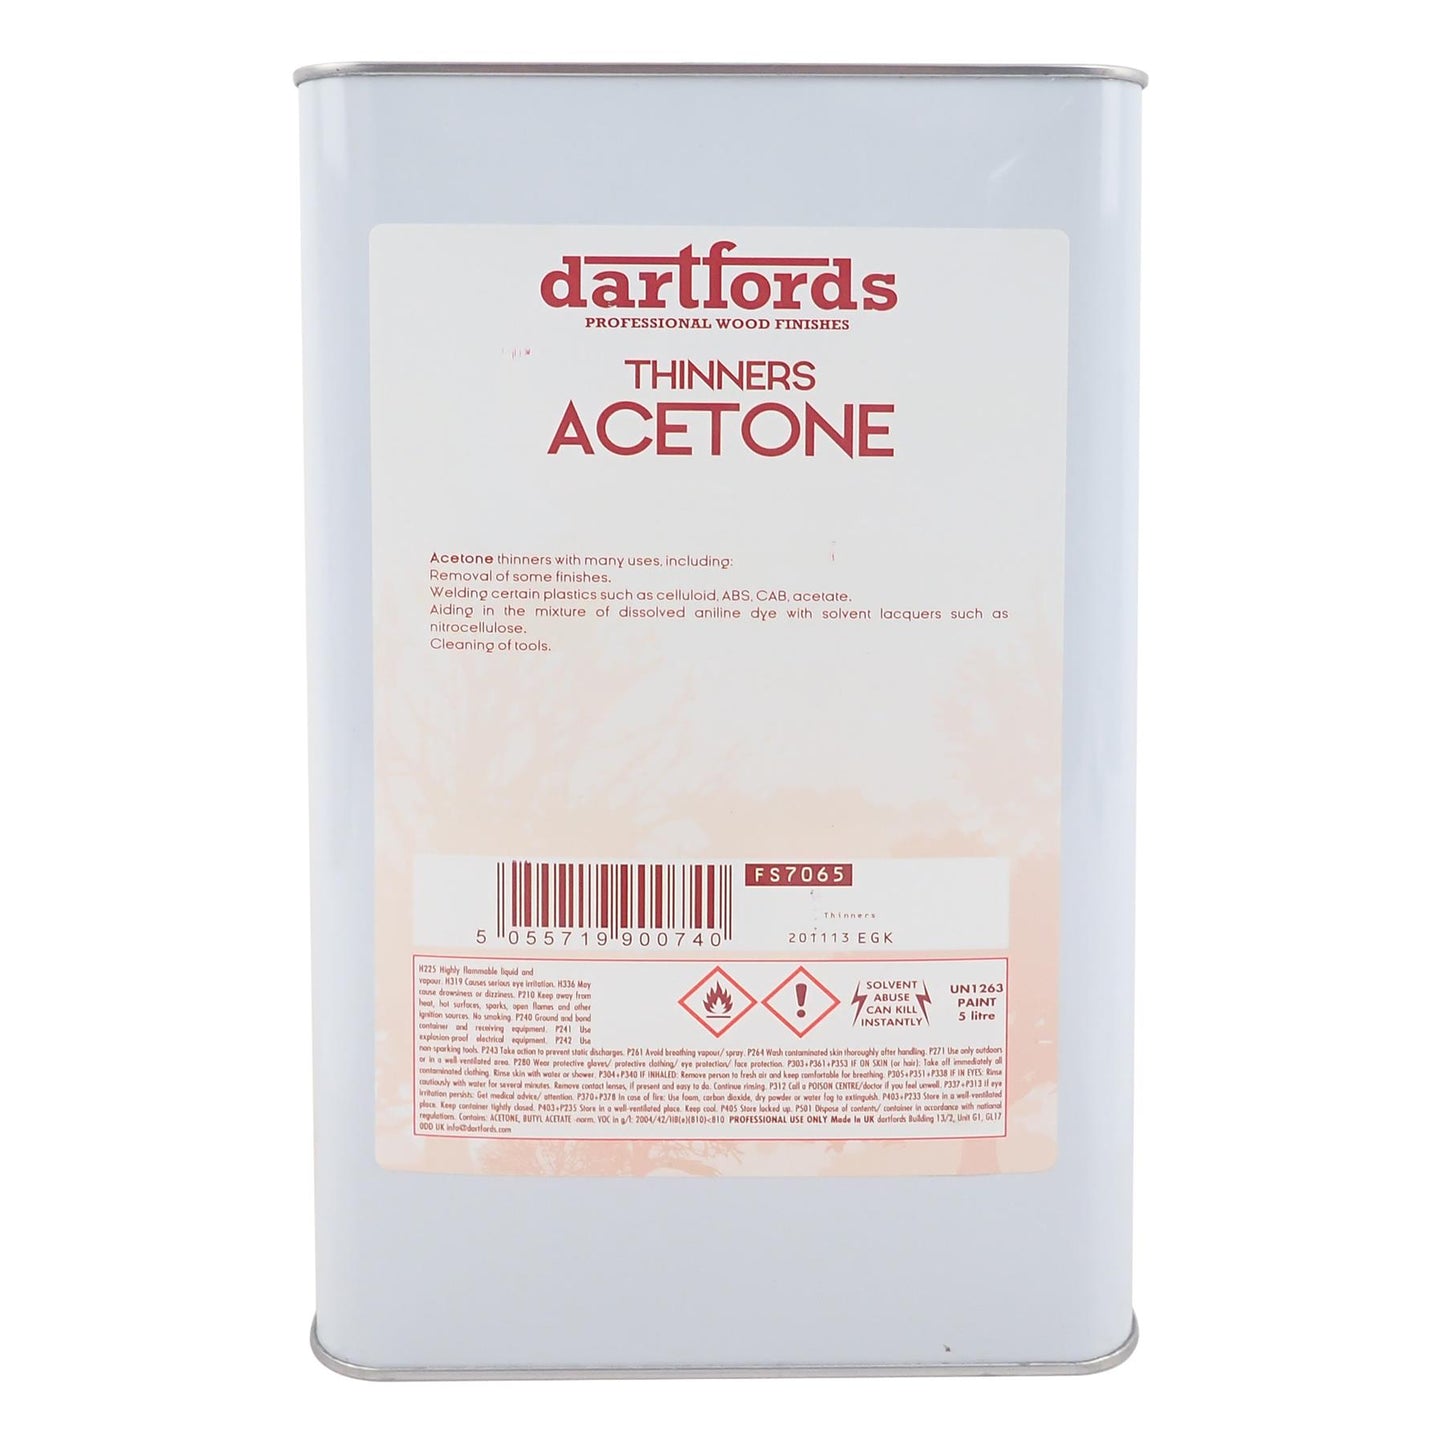 dartfords Acetone Thinners 5 litre Jerrycan